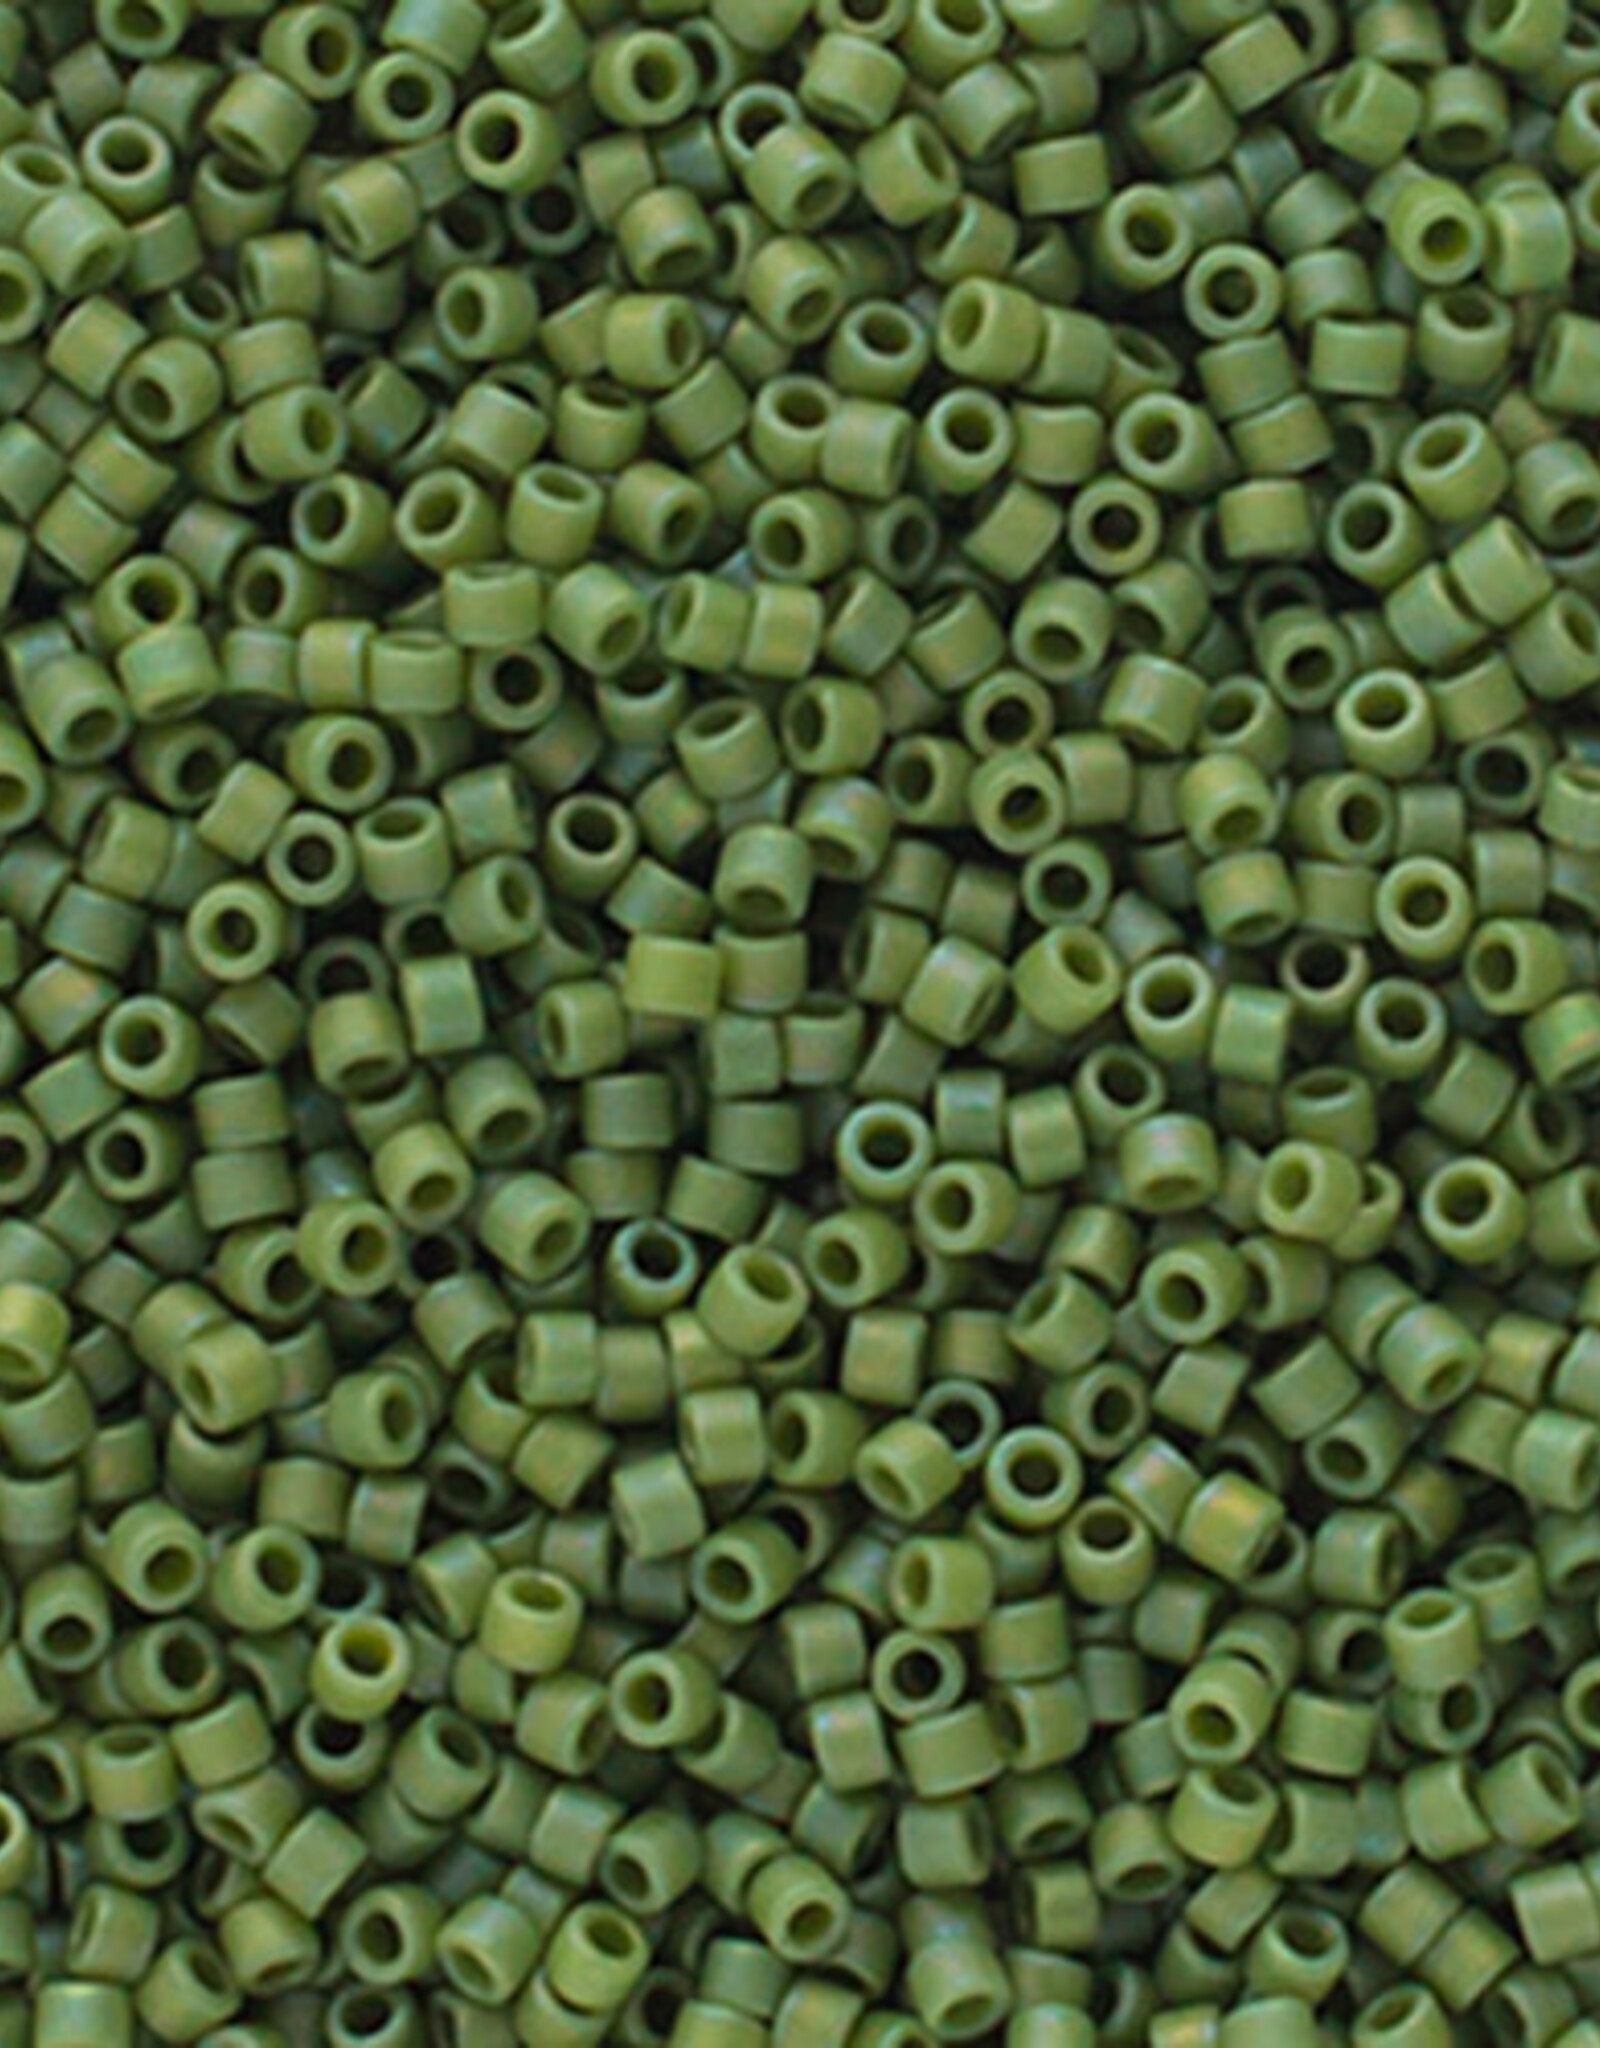 Miyuki Delica Seed Beads Delica 11/0 Frosted Glazed Rainbow Green 2310V